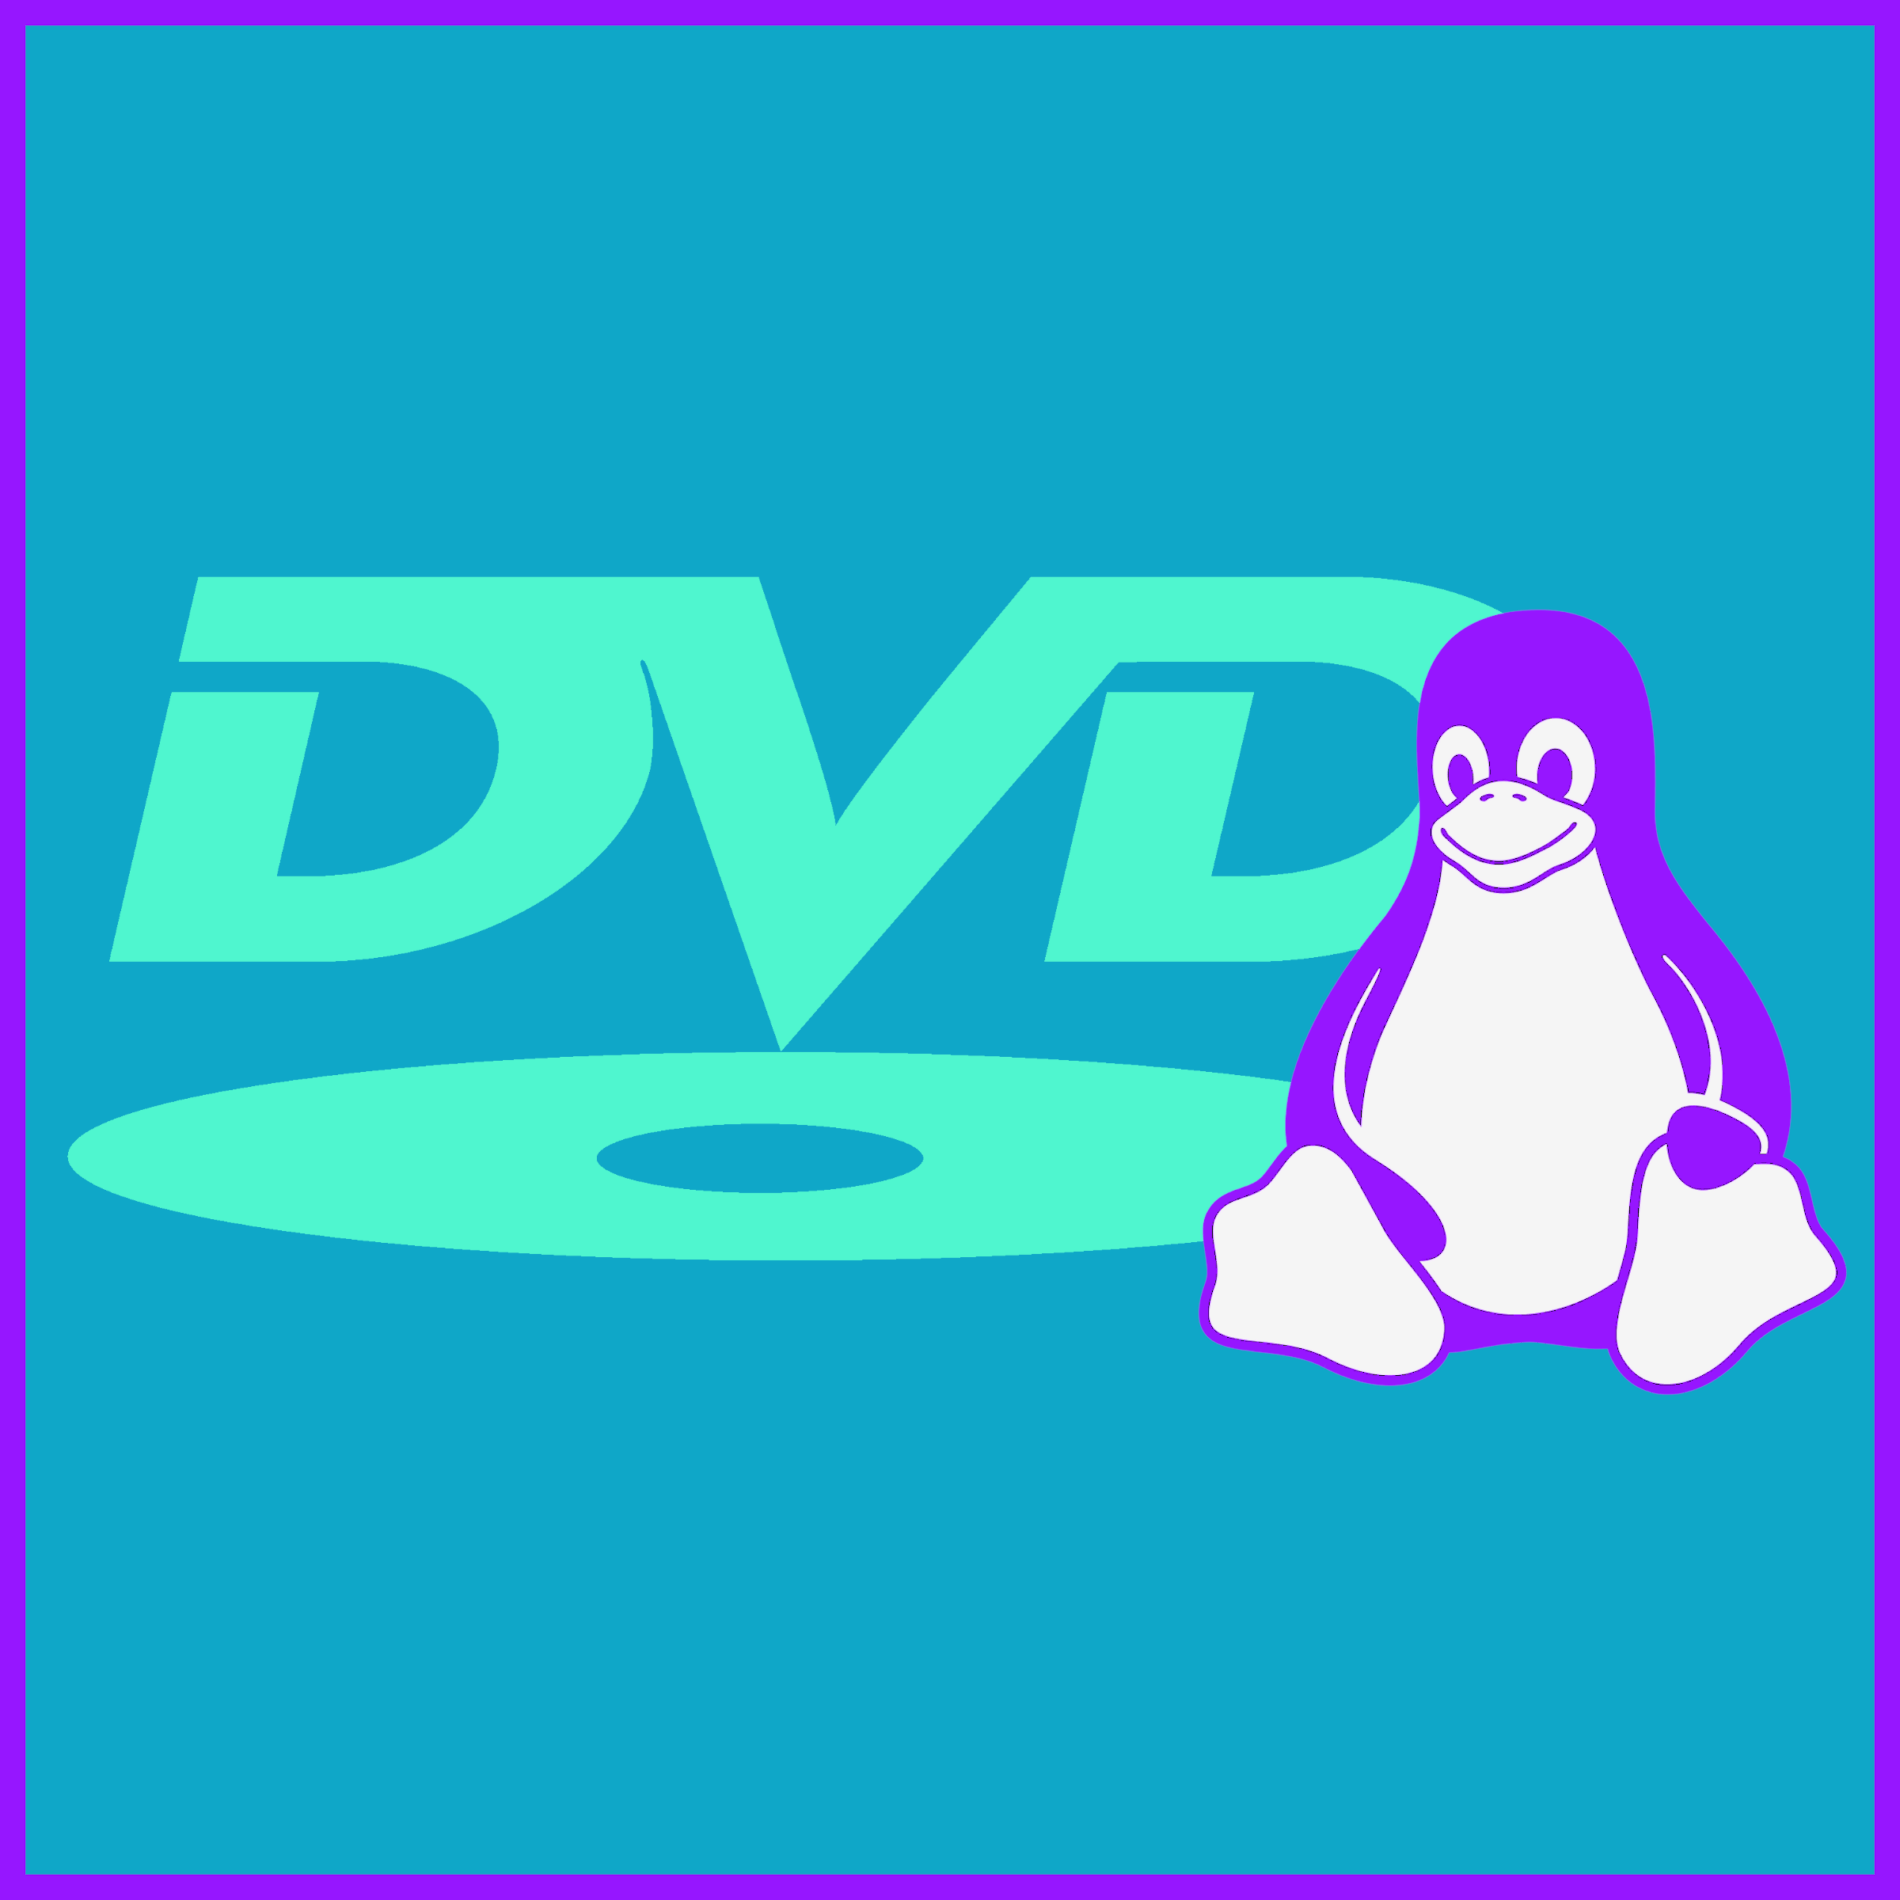 DVD support (with libdvdcss) and media codecs on Linux (square)